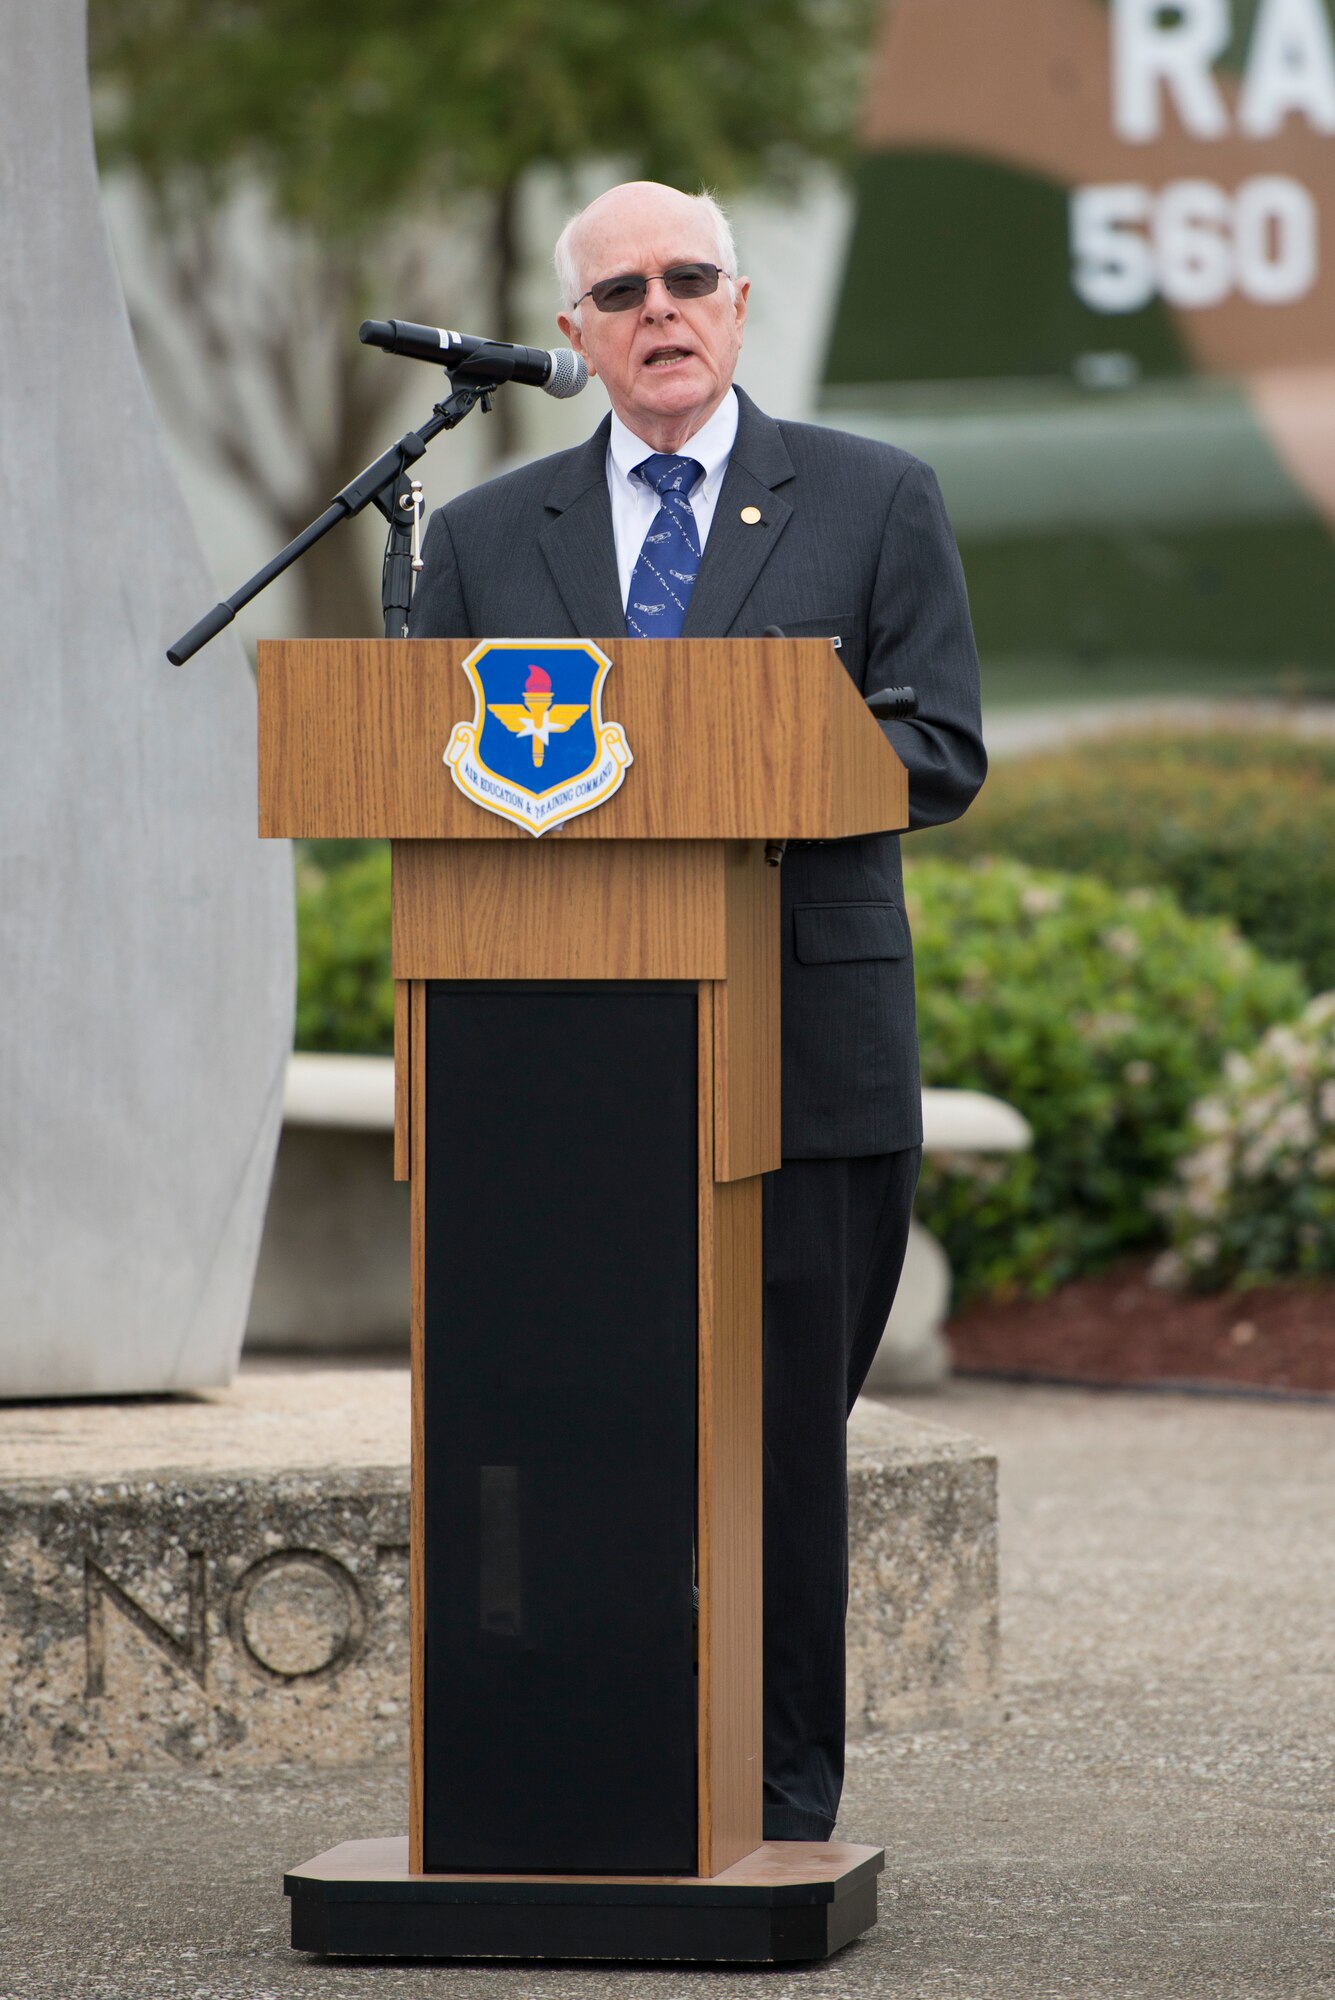 U.S. Air force retired Col. Robert Certain, Freedom Flyer #200 spoke during a wreath-laying ceremony March 23, 2018 at Joint Base San Antonio-Randolph, TX. The ceremony was held at the Missing Man Formation Monument to honor all prisoners of war and missing in action service members from the Vietnam War. (U.S. Air Force photo by Sean Worrell)